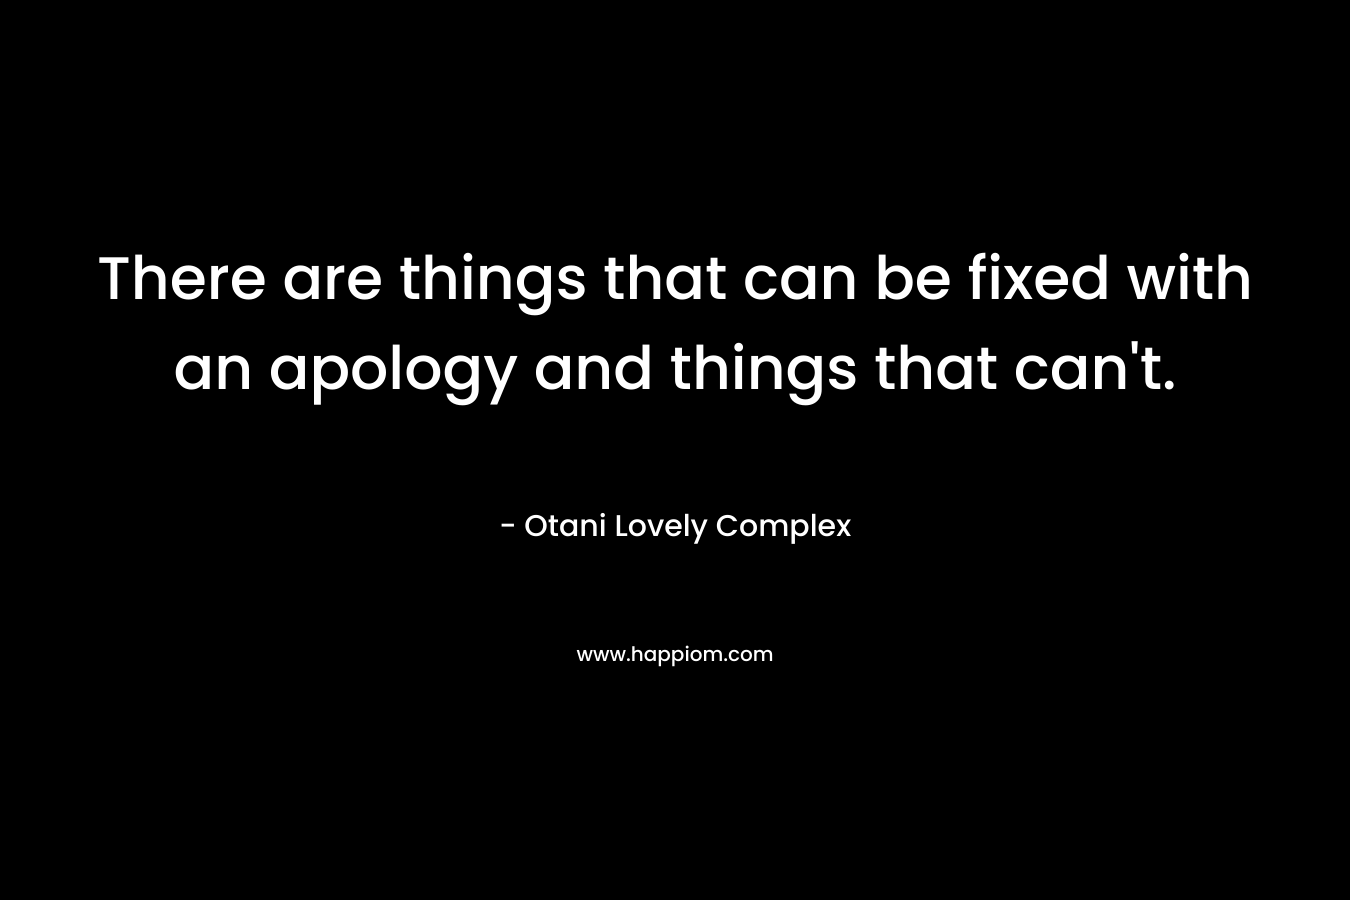 There are things that can be fixed with an apology and things that can't.